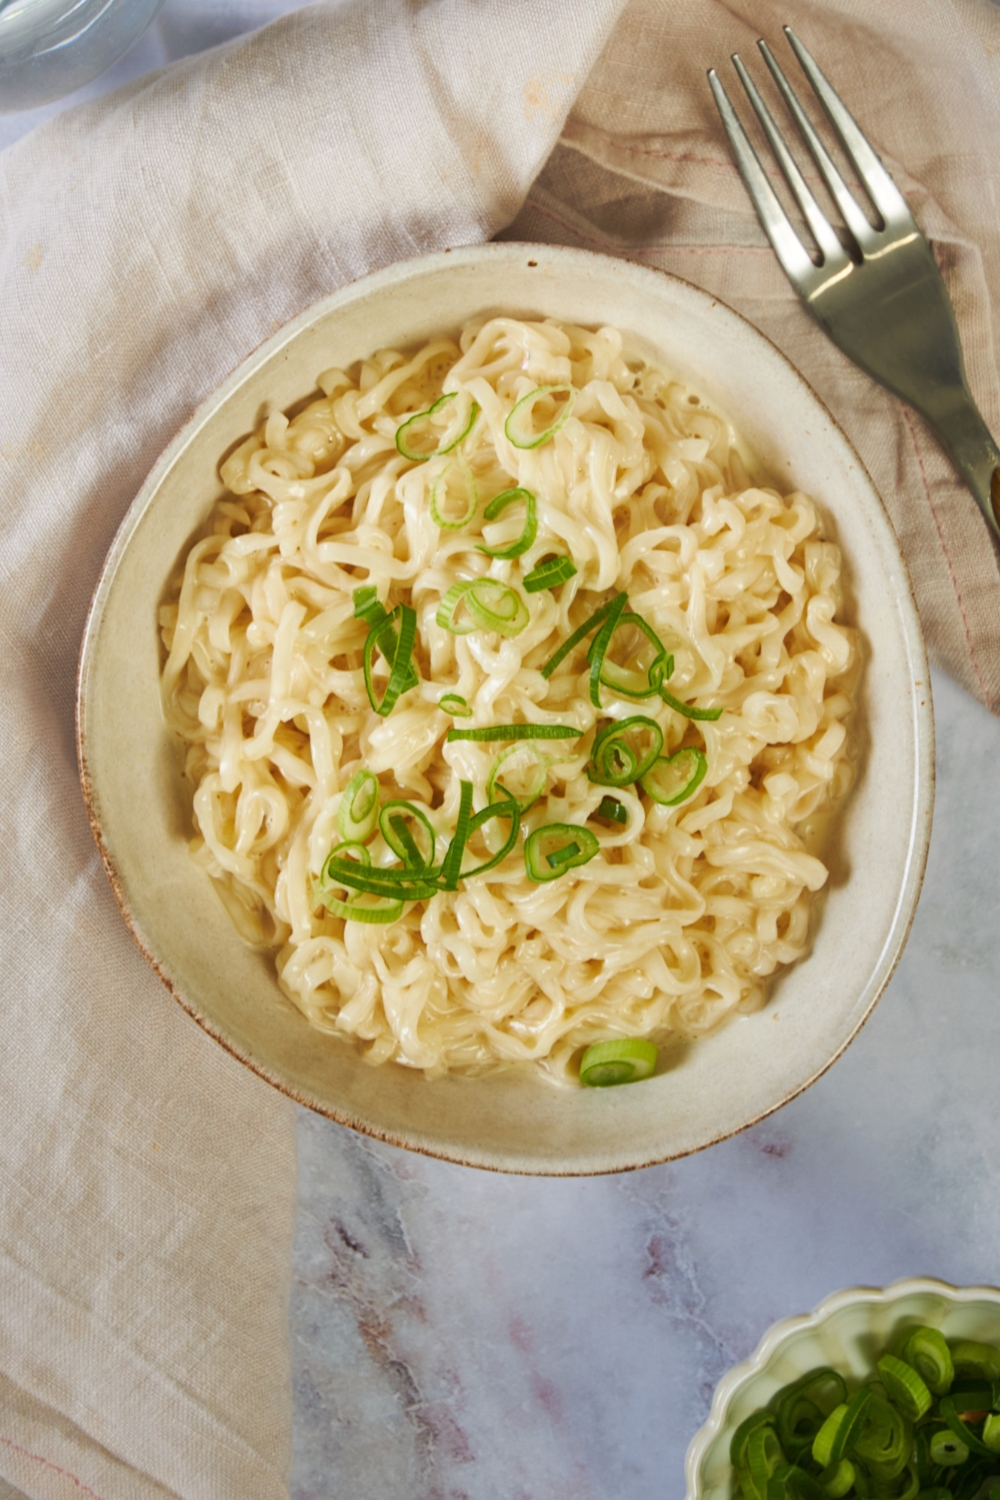 Green scallions on top of ramen noodles that are in a white bowl on a counter.